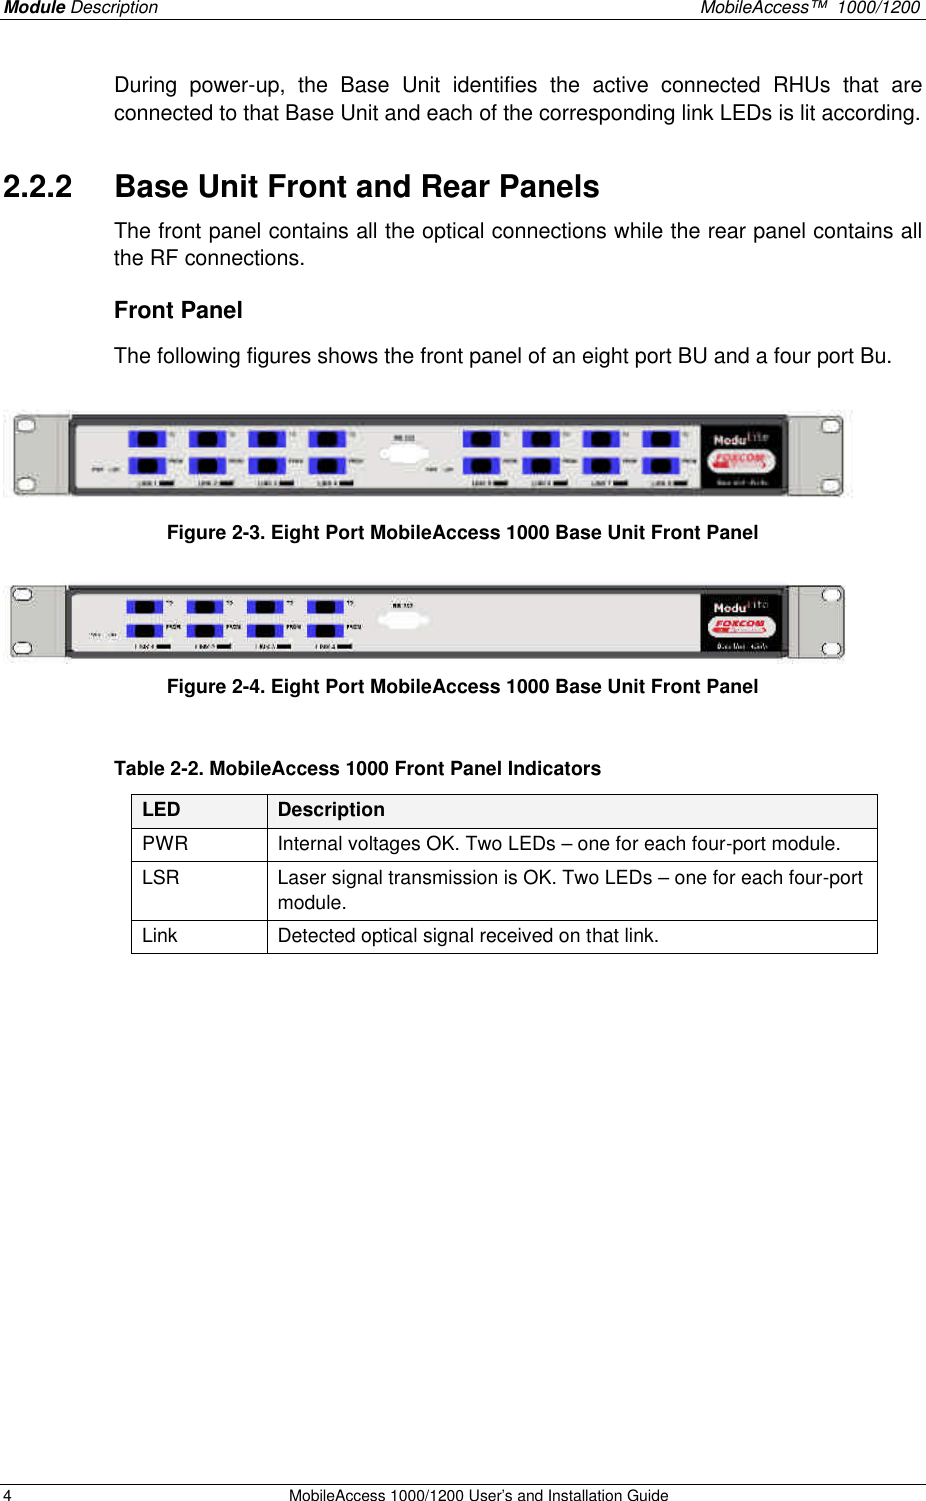 Module Description    MobileAccess™  1000/1200 4 MobileAccess 1000/1200 User’s and Installation Guide  During power-up, the Base Unit identifies the active connected RHUs that are connected to that Base Unit and each of the corresponding link LEDs is lit according. 2.2.2  Base Unit Front and Rear Panels The front panel contains all the optical connections while the rear panel contains all the RF connections. Front Panel The following figures shows the front panel of an eight port BU and a four port Bu.   Figure 2-3. Eight Port MobileAccess 1000 Base Unit Front Panel  Figure 2-4. Eight Port MobileAccess 1000 Base Unit Front Panel  Table 2-2. MobileAccess 1000 Front Panel Indicators LED Description PWR Internal voltages OK. Two LEDs – one for each four-port module. LSR Laser signal transmission is OK. Two LEDs – one for each four-port module.  Link Detected optical signal received on that link.   